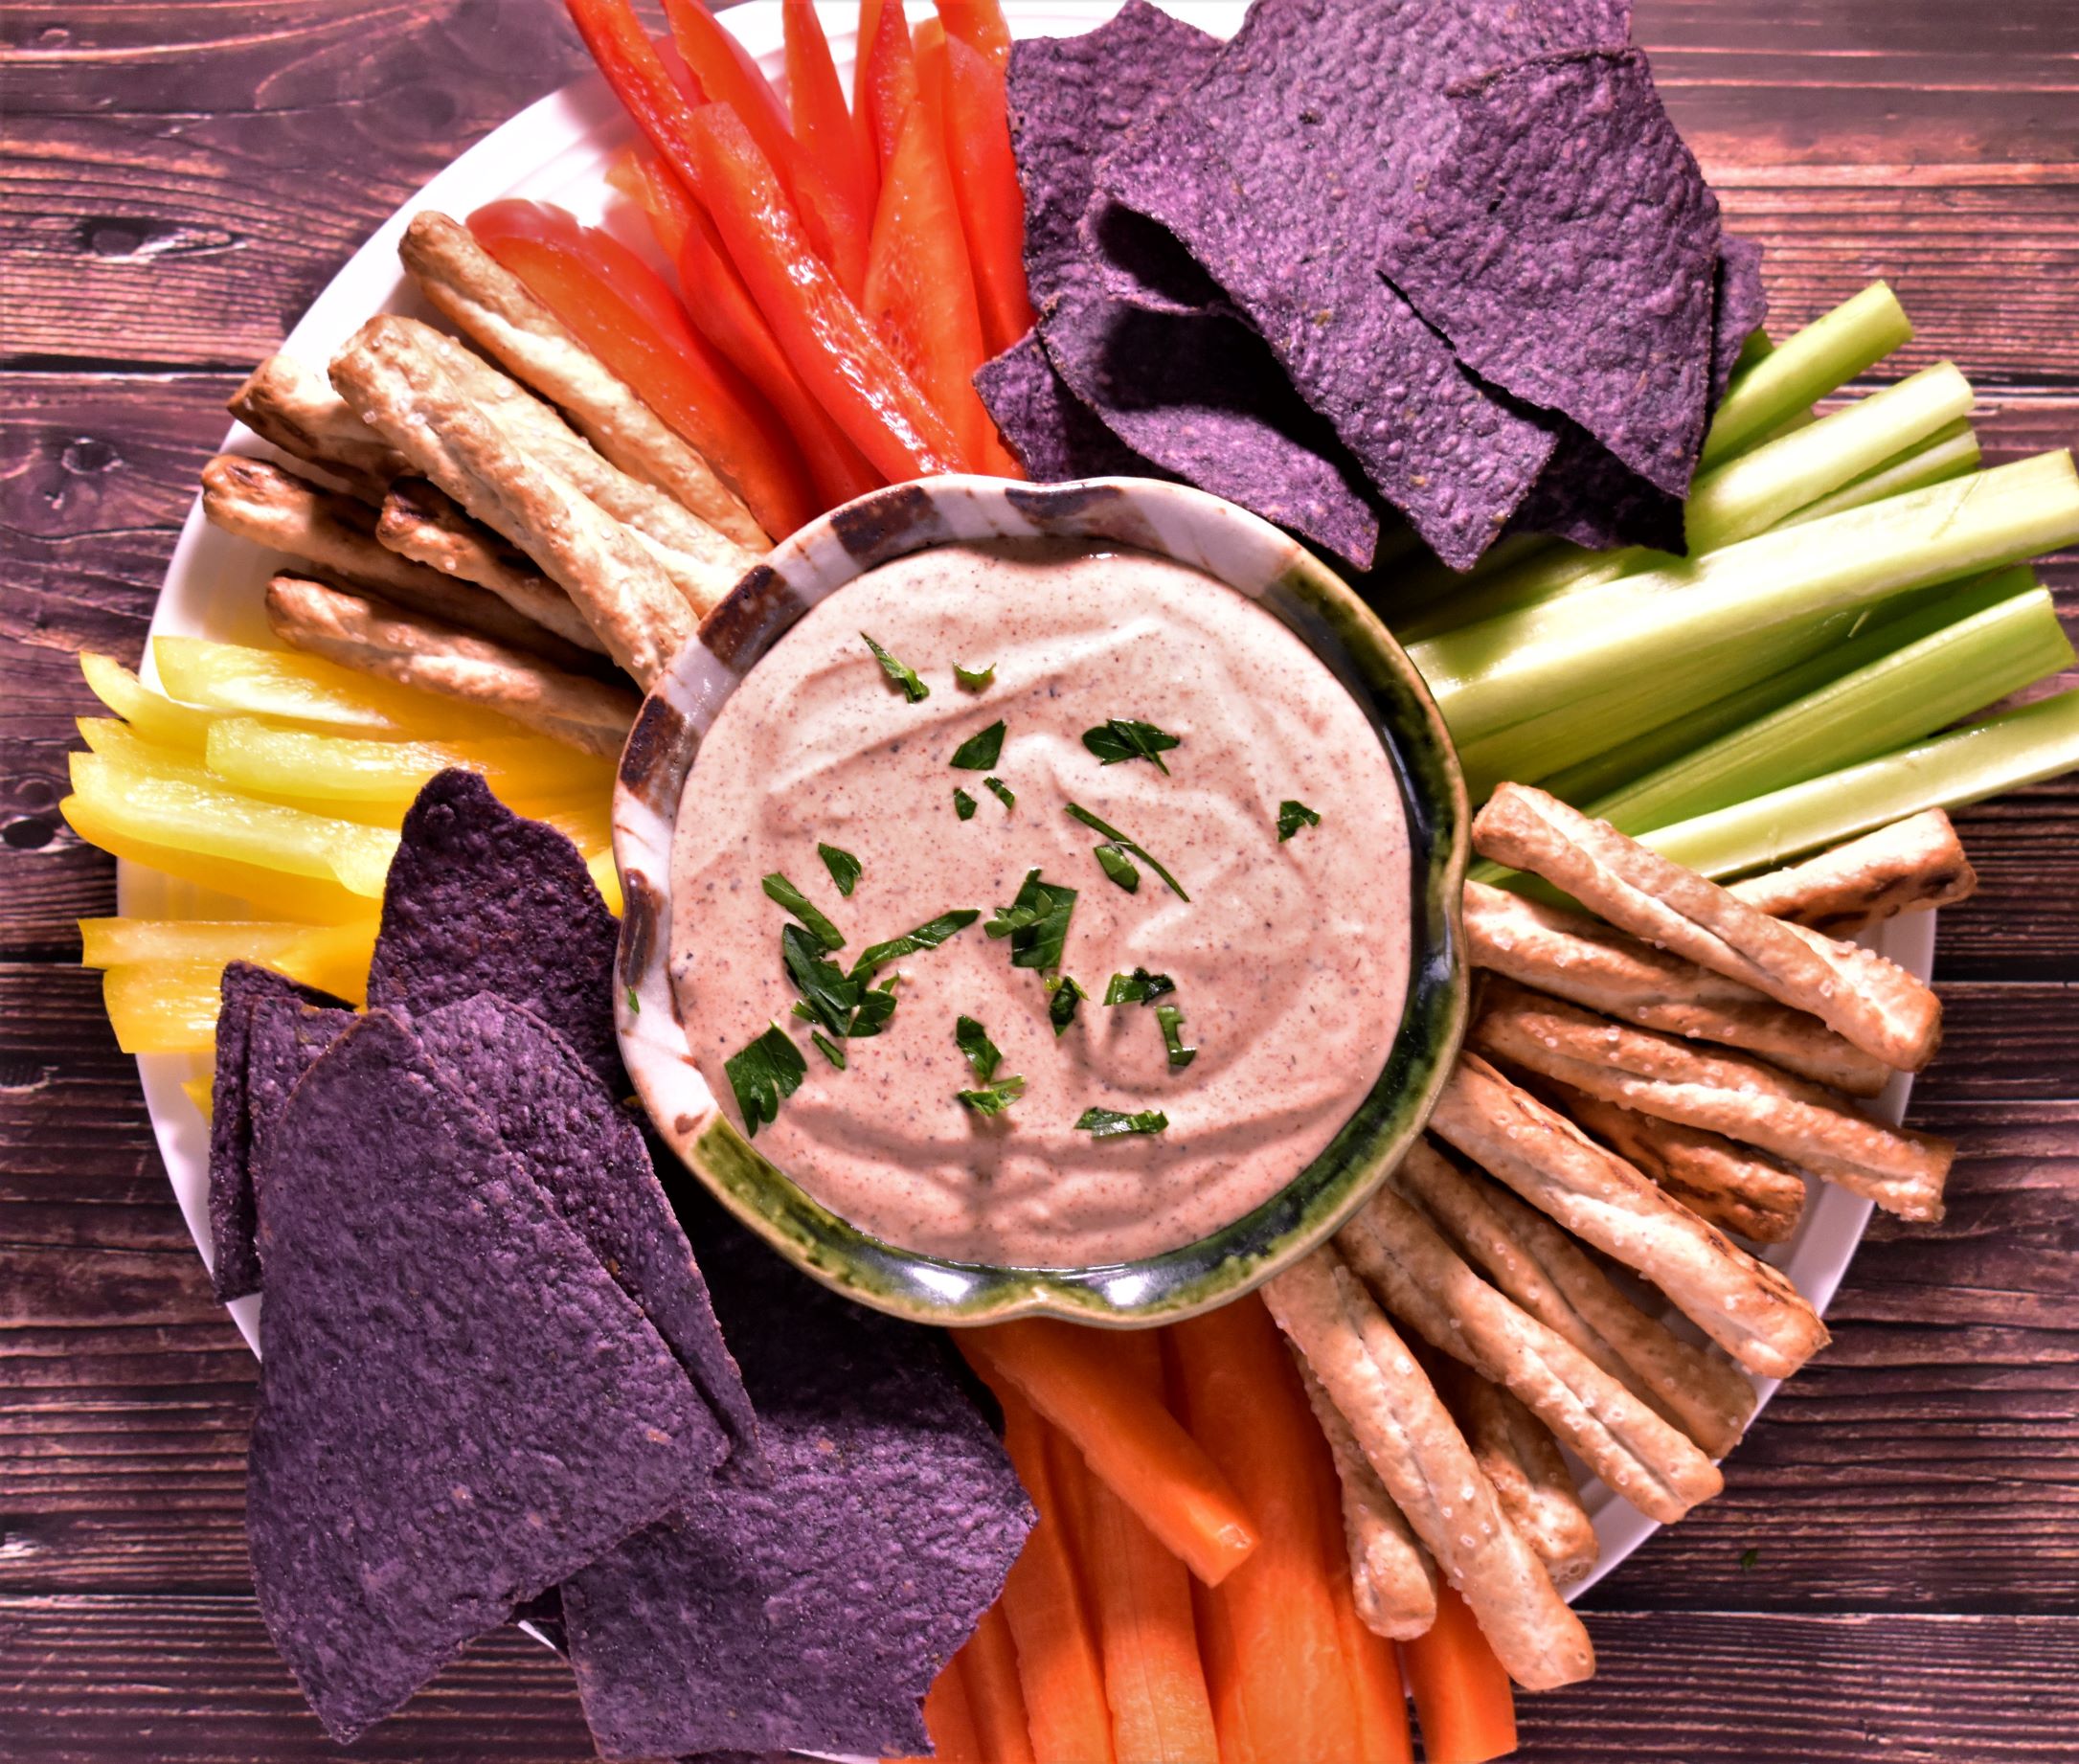 a bowl of greek yogurt chipotle ranch dip surrounded by blue tortilla chips, carrots, celery and other stick shapped dipping snacks